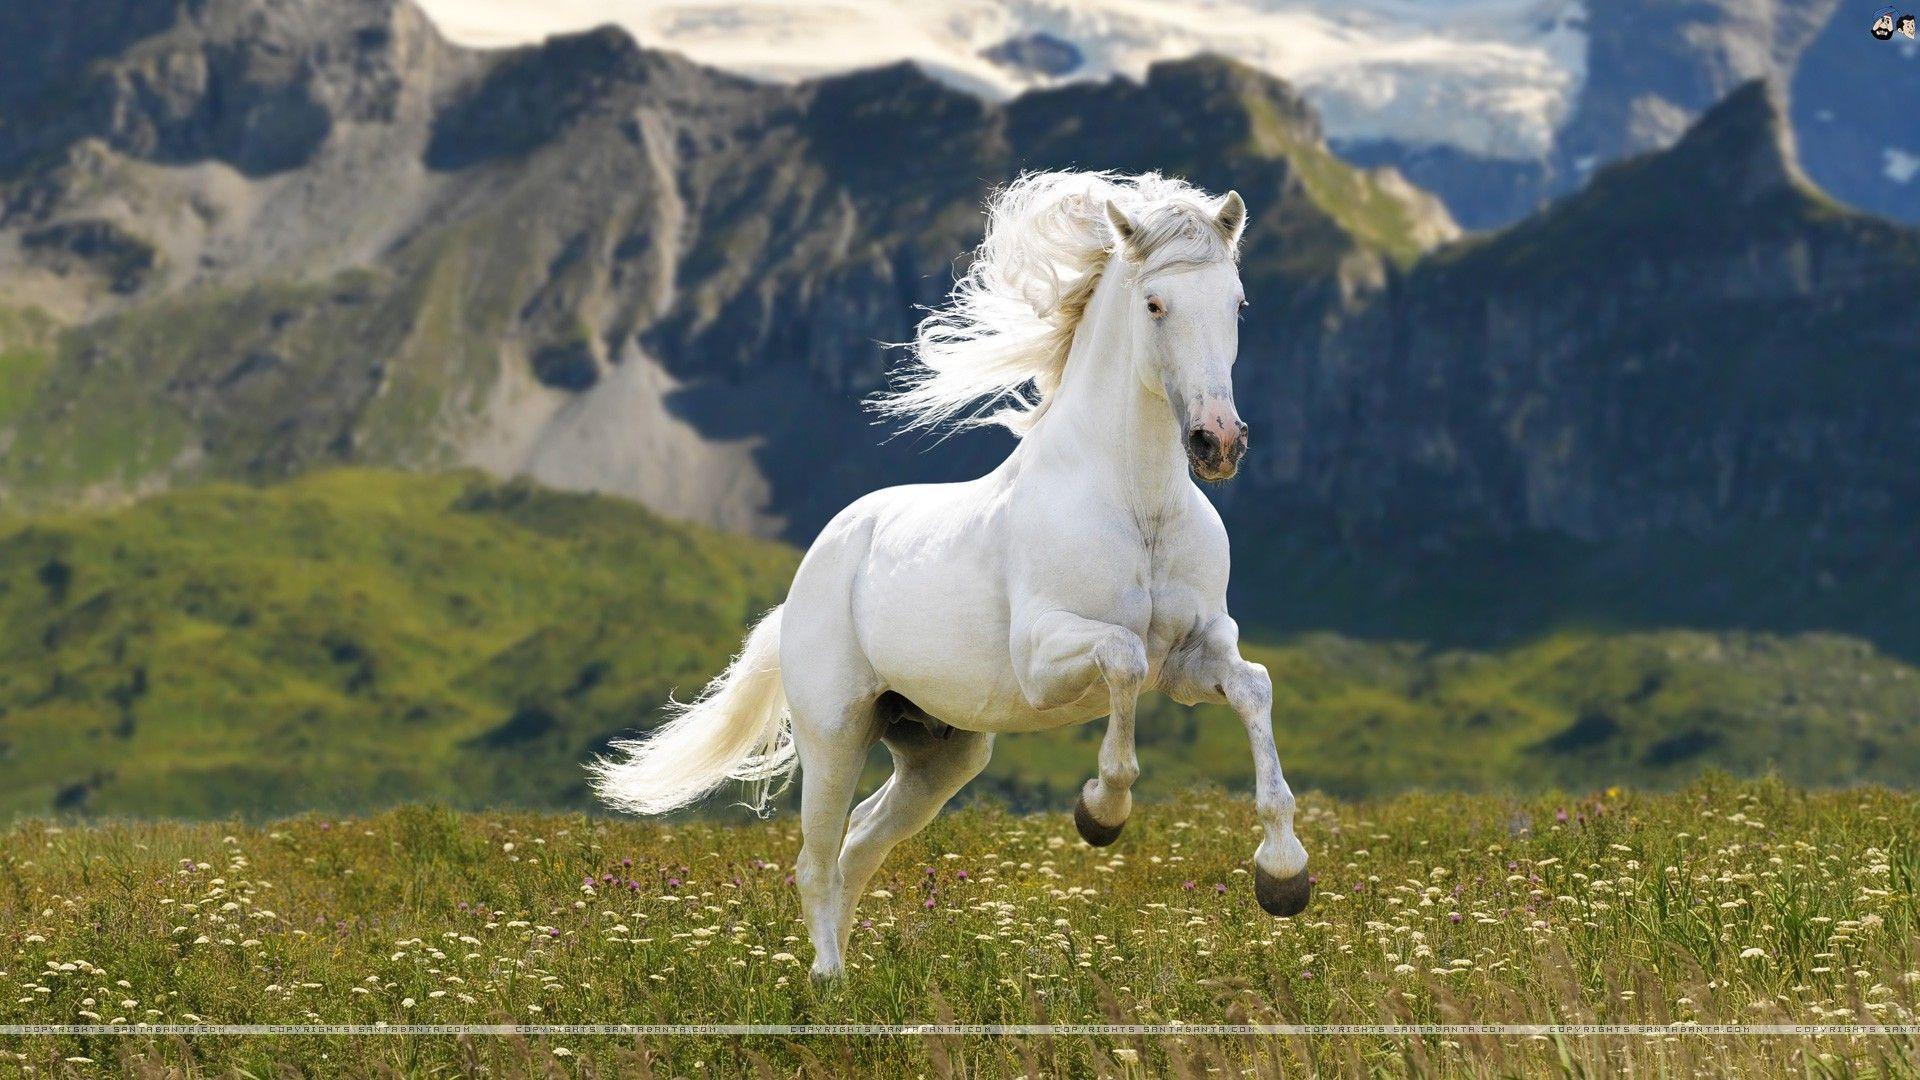 7 Horse Wall Papper Hd : Horse Wallpapers Hd